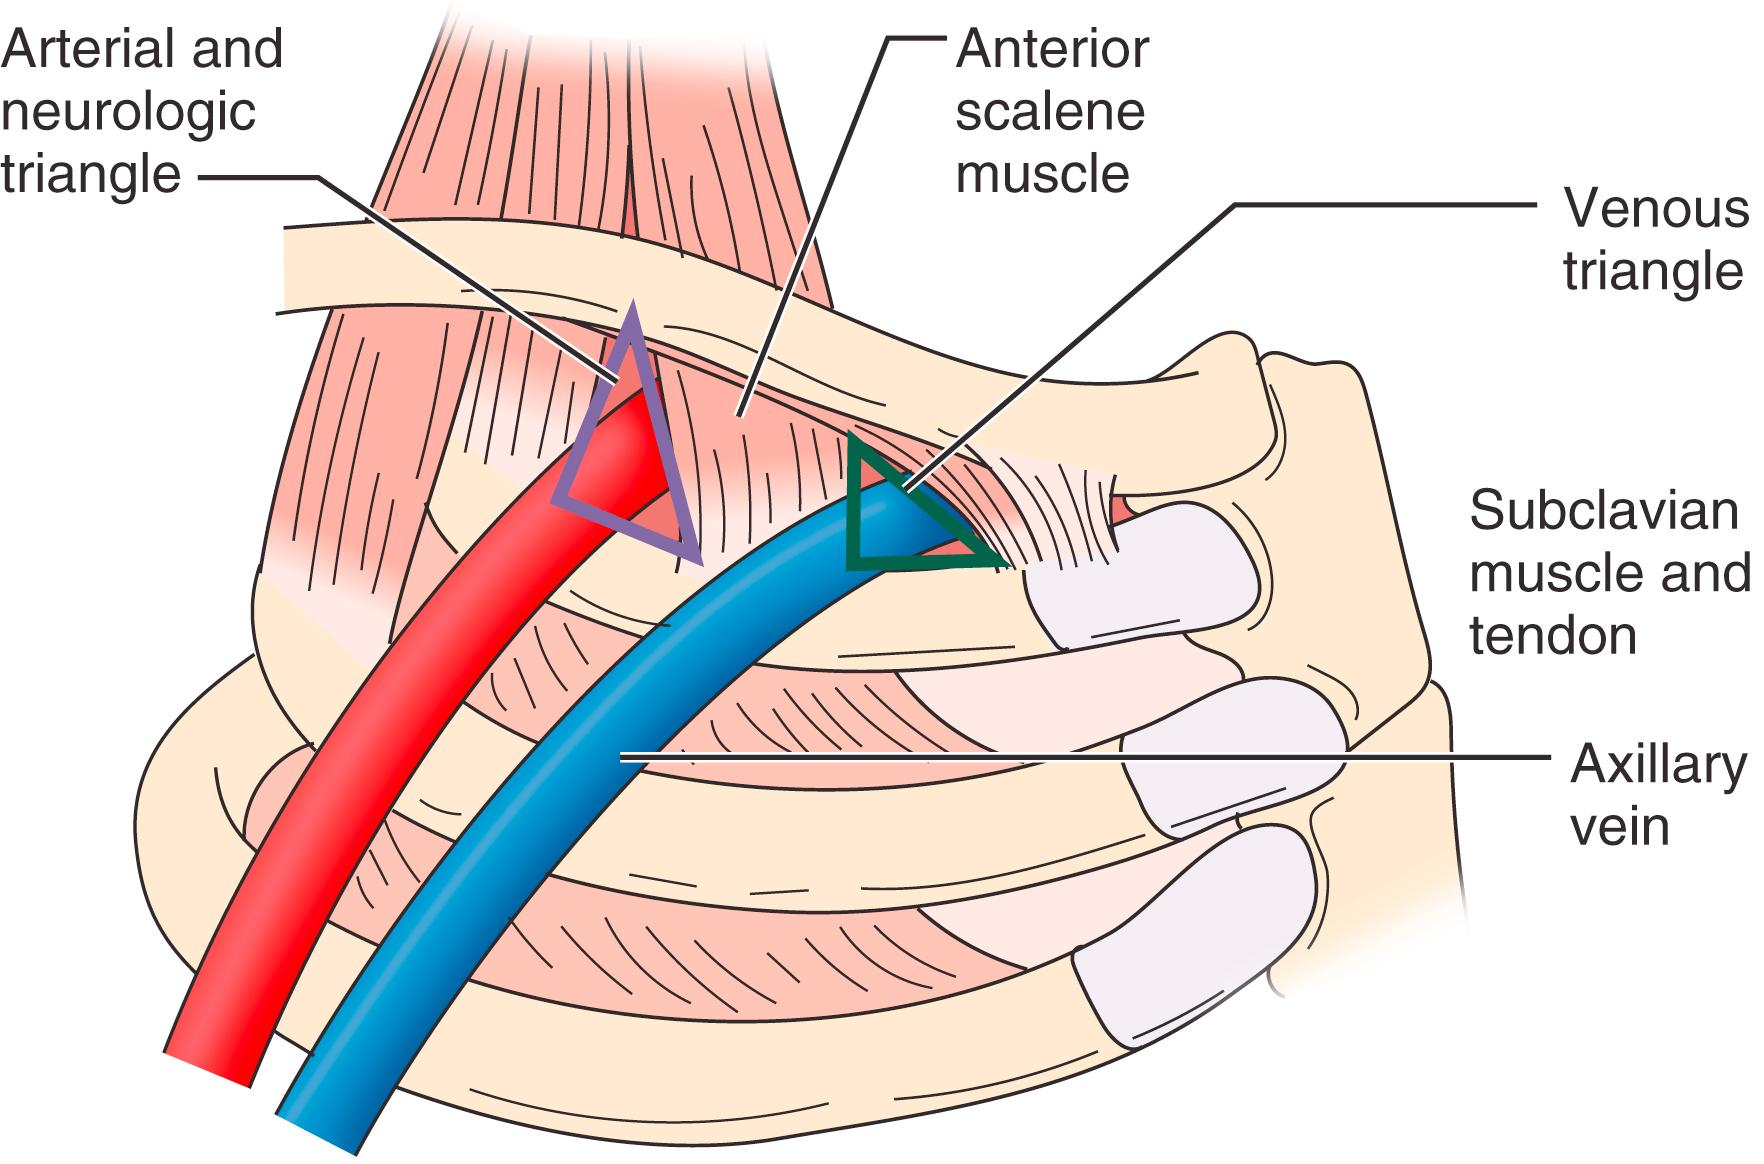 Figure 123.2, Anatomic triangles of the thoracic outlet highlighting the location of the neurovascular structures. The subclavian artery and brachial plexus traverse the thoracic outlet through the scalene triangle. The subclavian vein traverses the thoracic outlet anterior to this through the costoclavicular space.